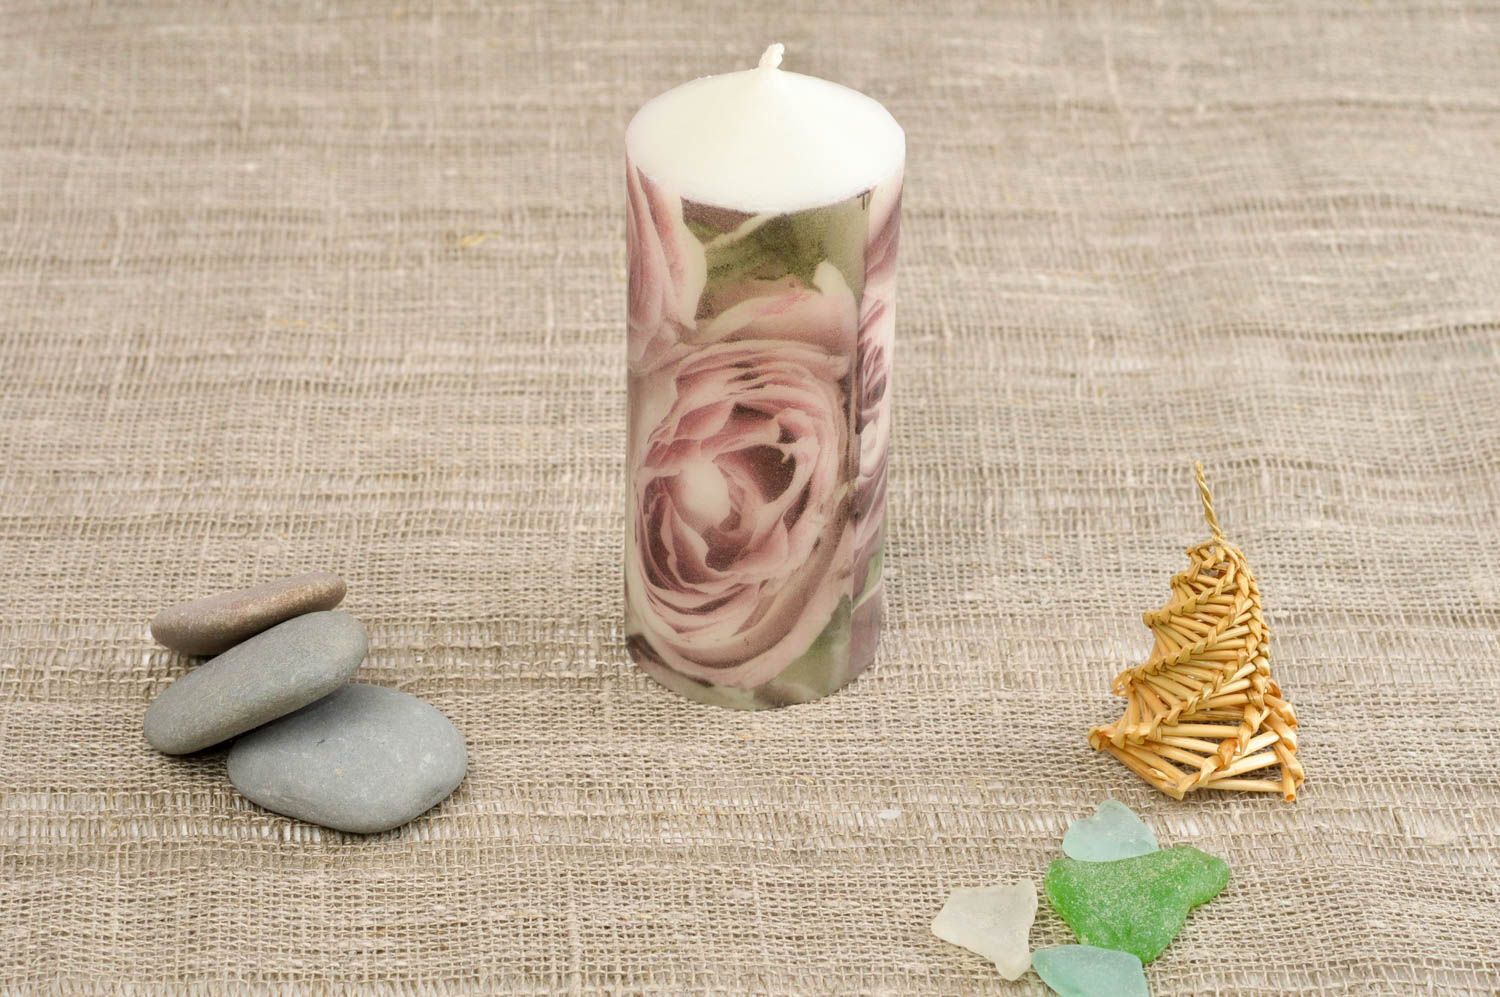 Unusual handmade cute candles design candle art room decor ideas small gifts photo 1